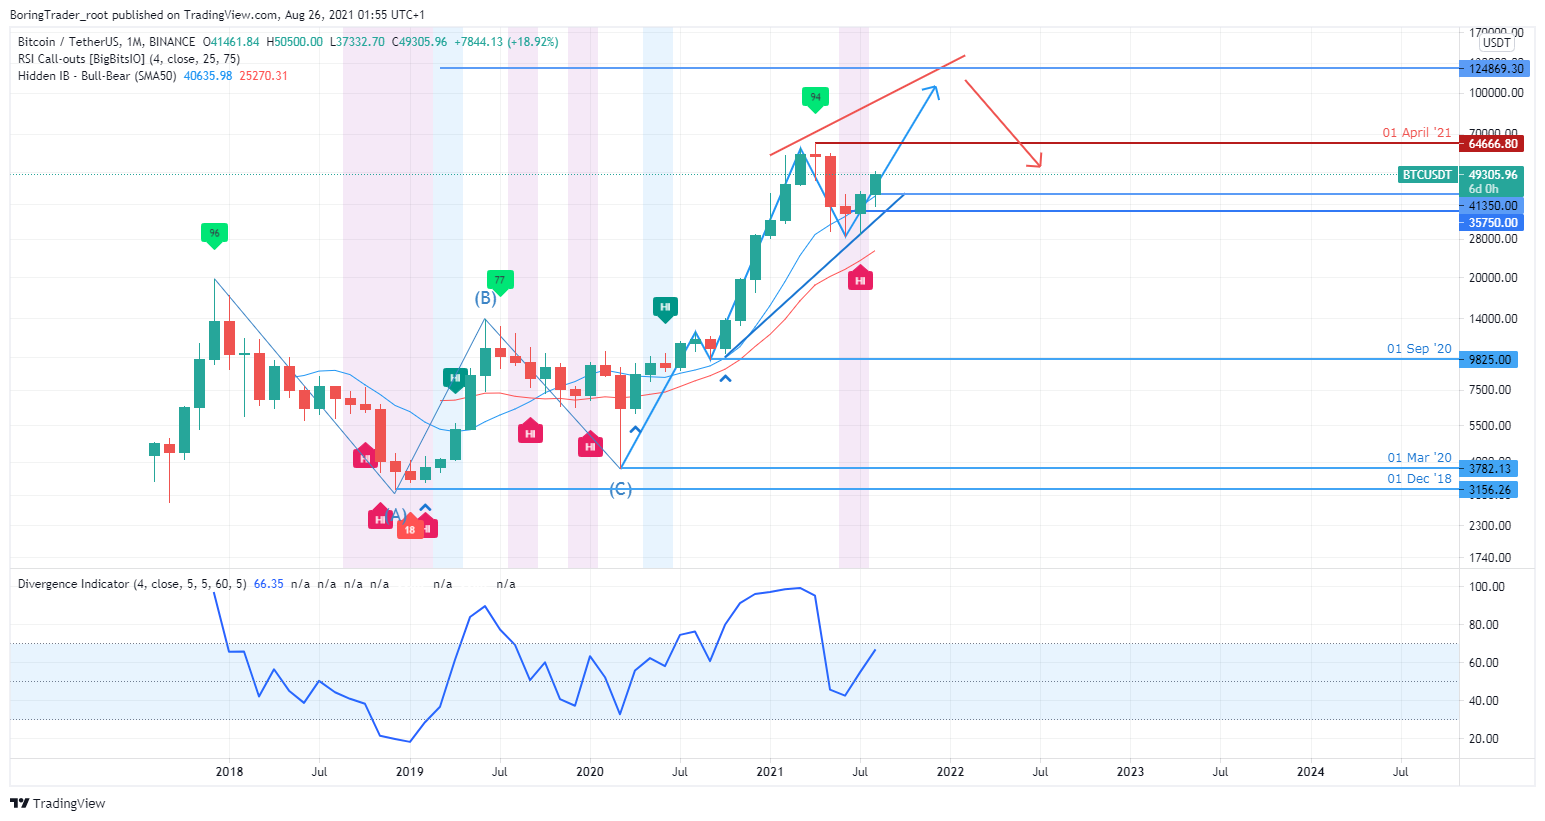 BTCUSD monthly chart - 26th August 2021